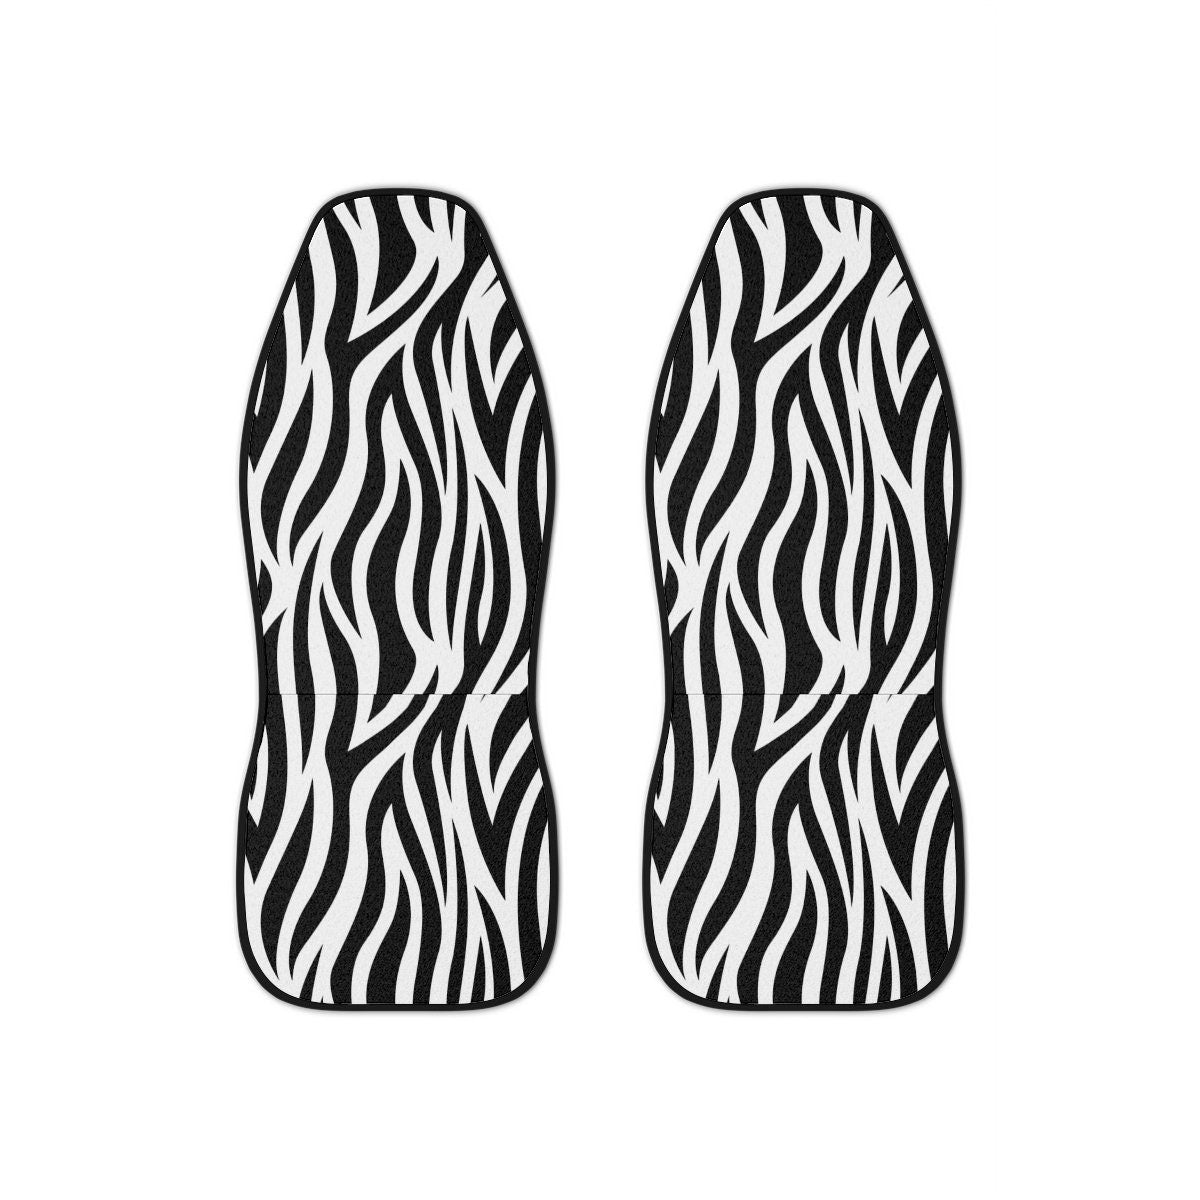 Seat Covers for Cars, Boho 70s Car Seat Cover, Cute Car Accessories for Women, Hippie Car Decor, Zebra Groovy Universal Vehicle Chair Cover